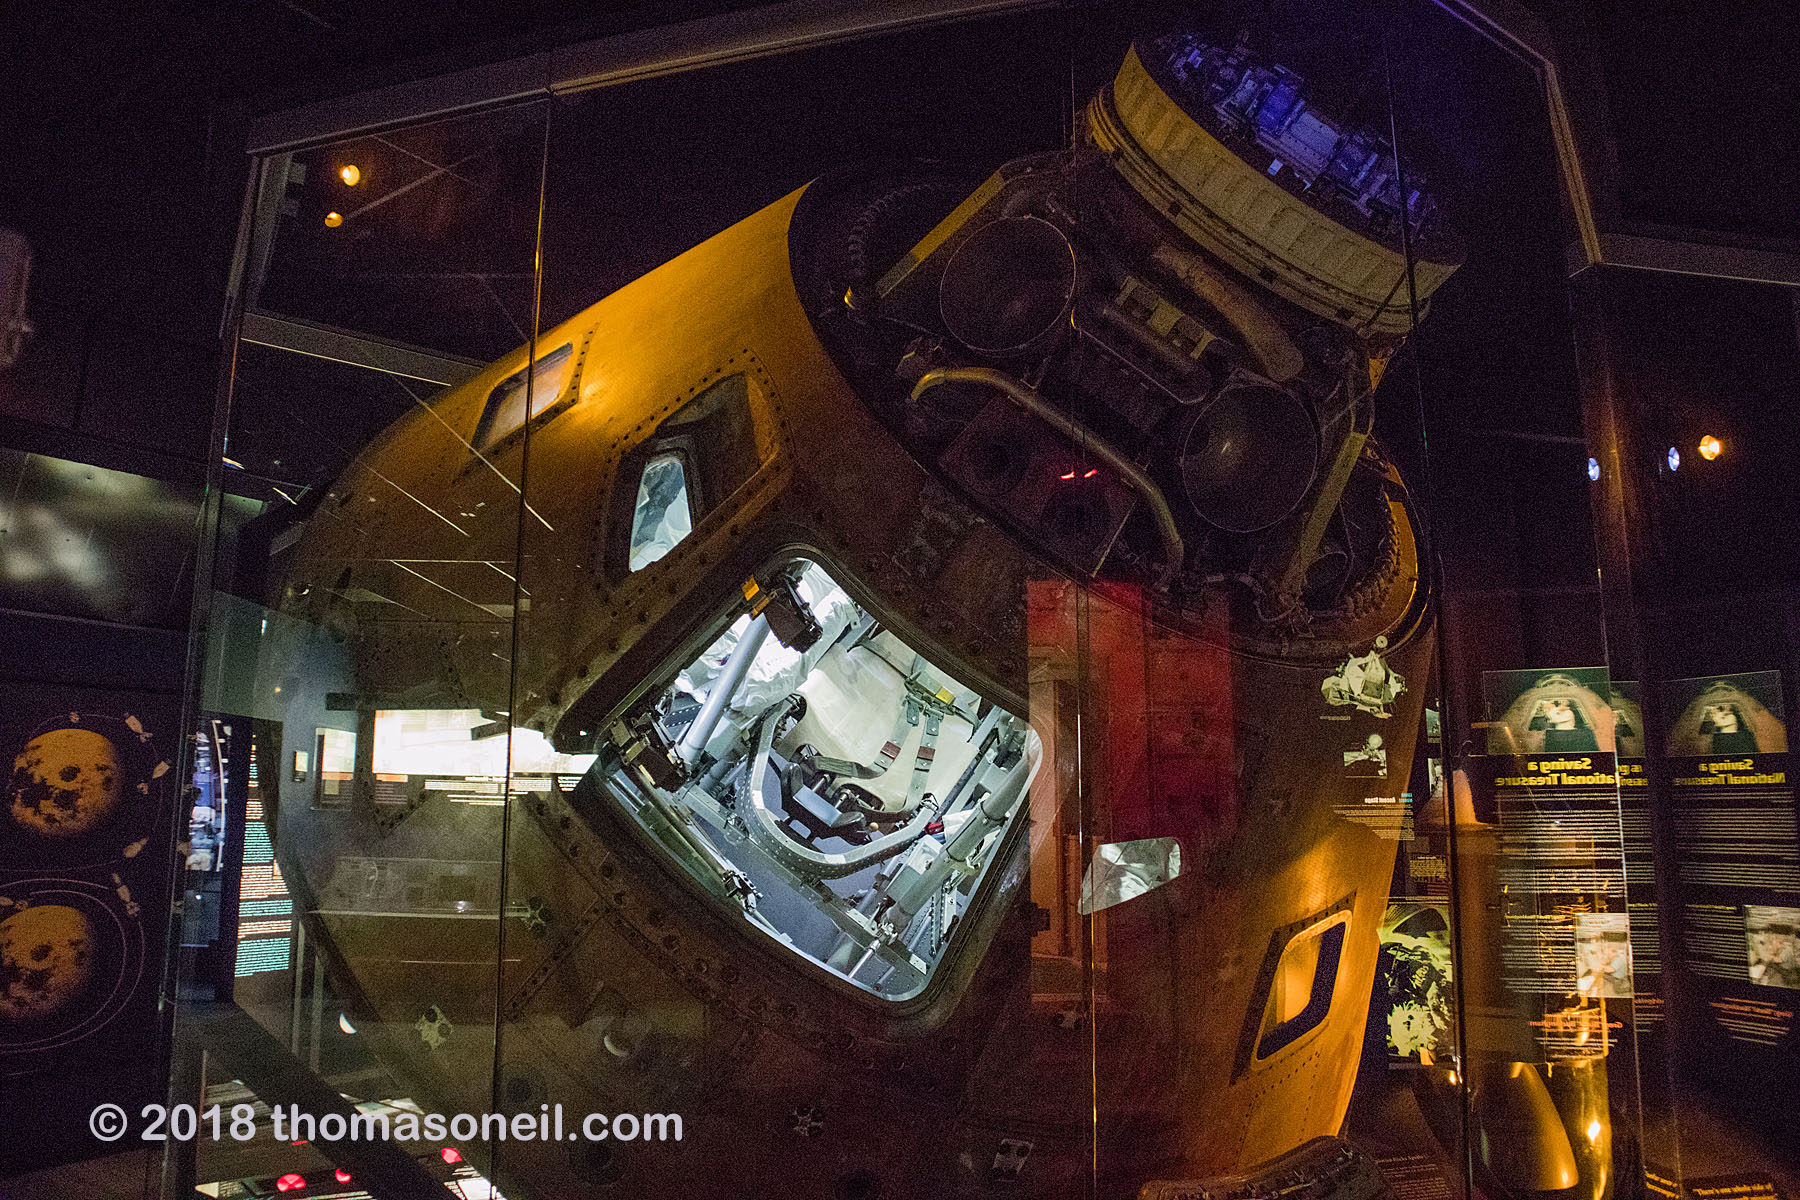 The Apollo 13 capsule in 2018 at the Kansas Cosmosphere.  Click for next photo.